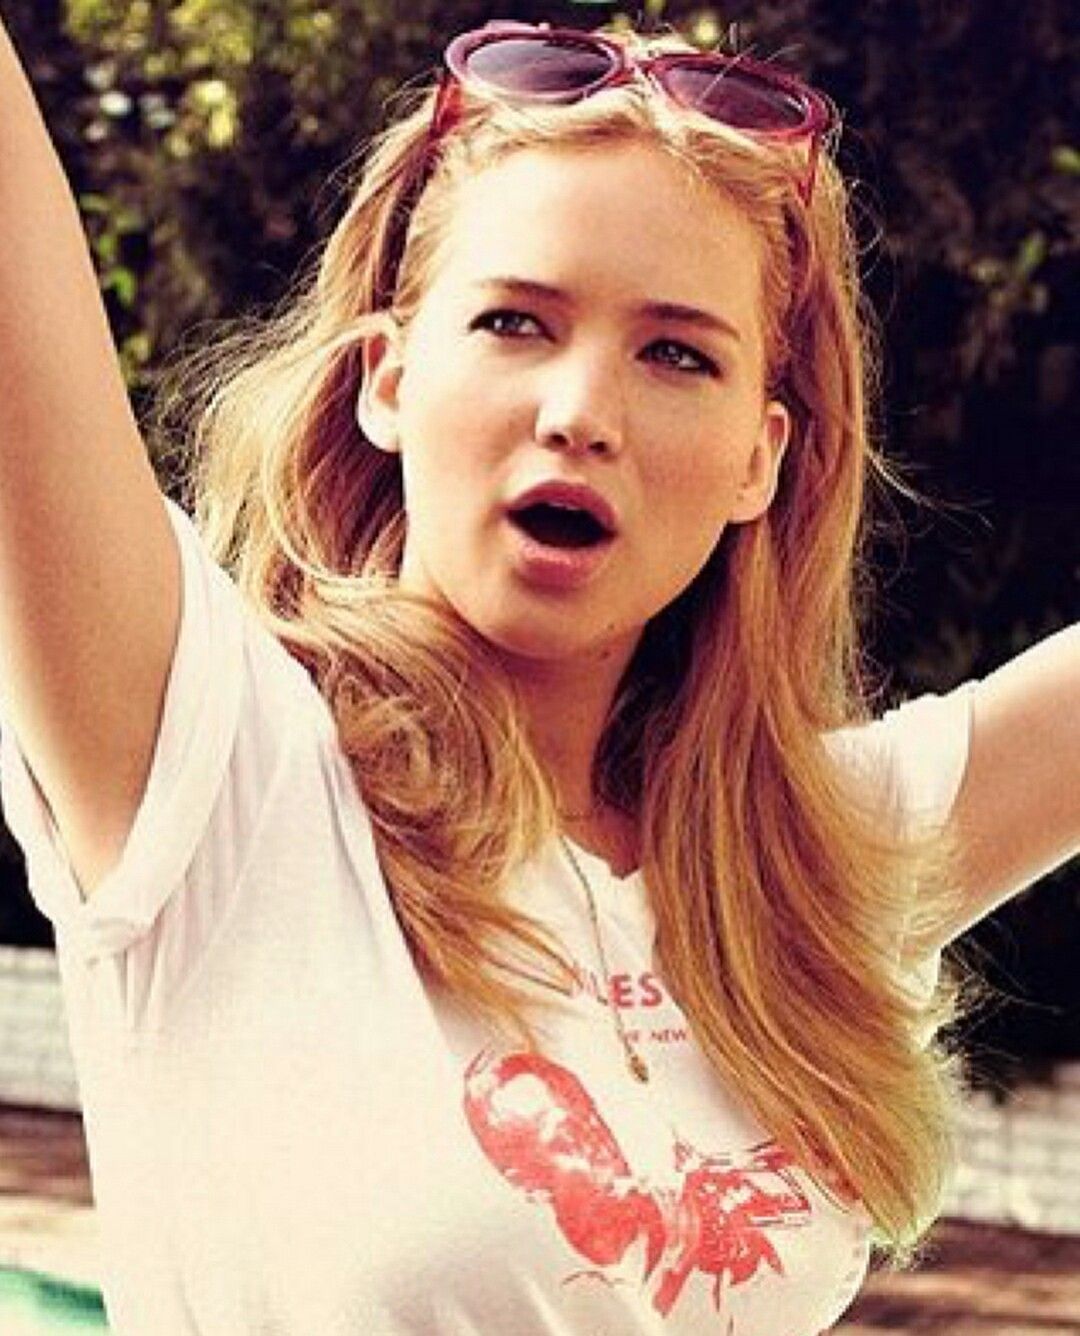 Jennifer Lawrence with her arms up and a surprised look on her face - Jennifer Lawrence